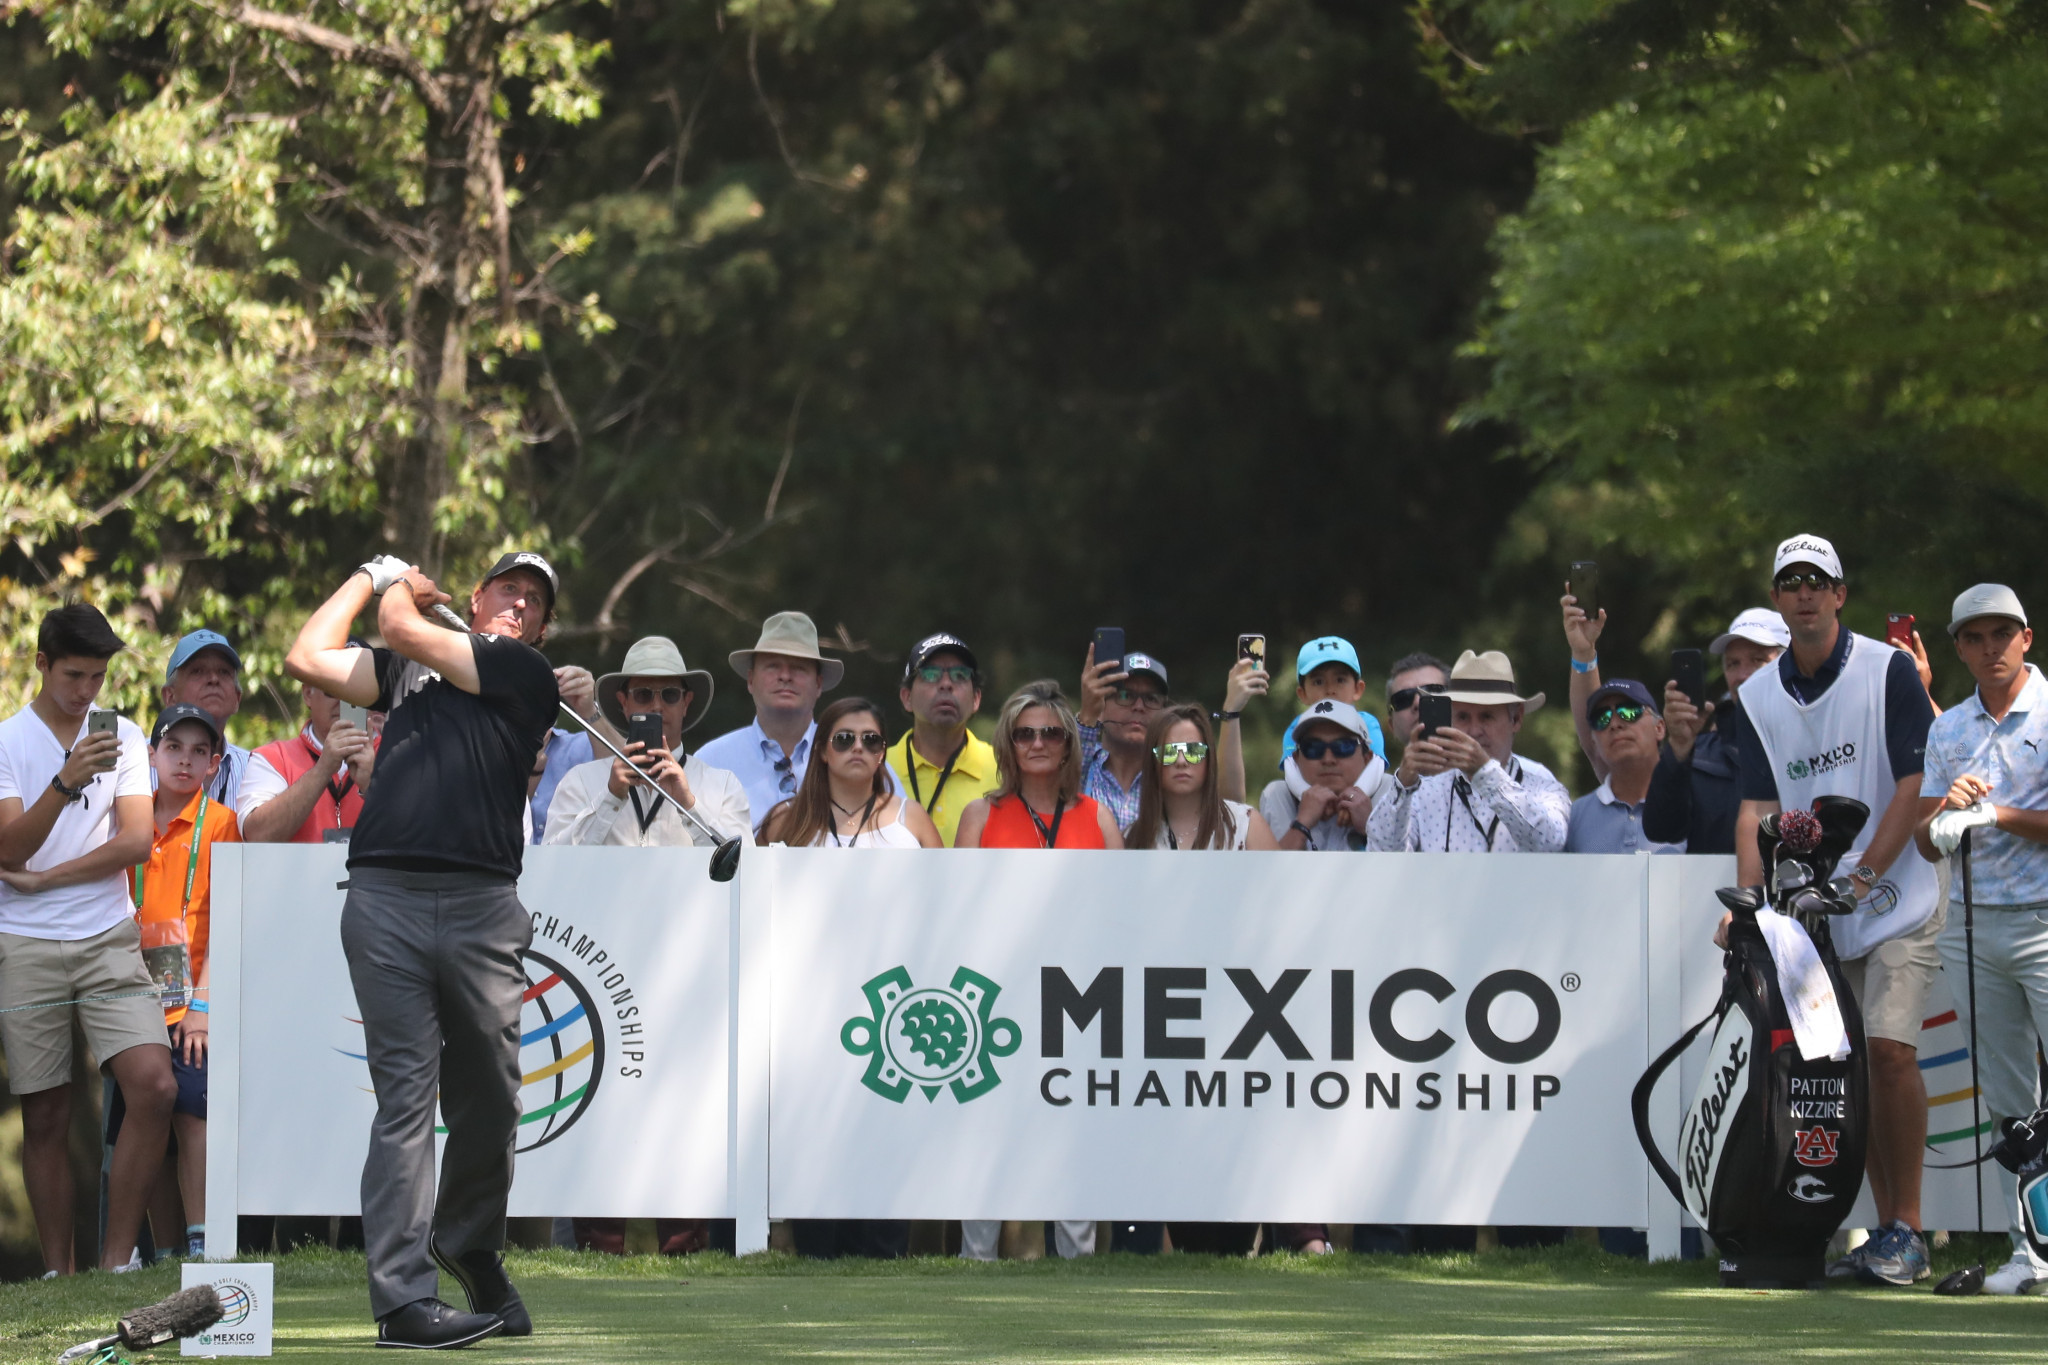 American Phil Mickelson is among the chasing pack at the World Golf Championship ©Getty Images